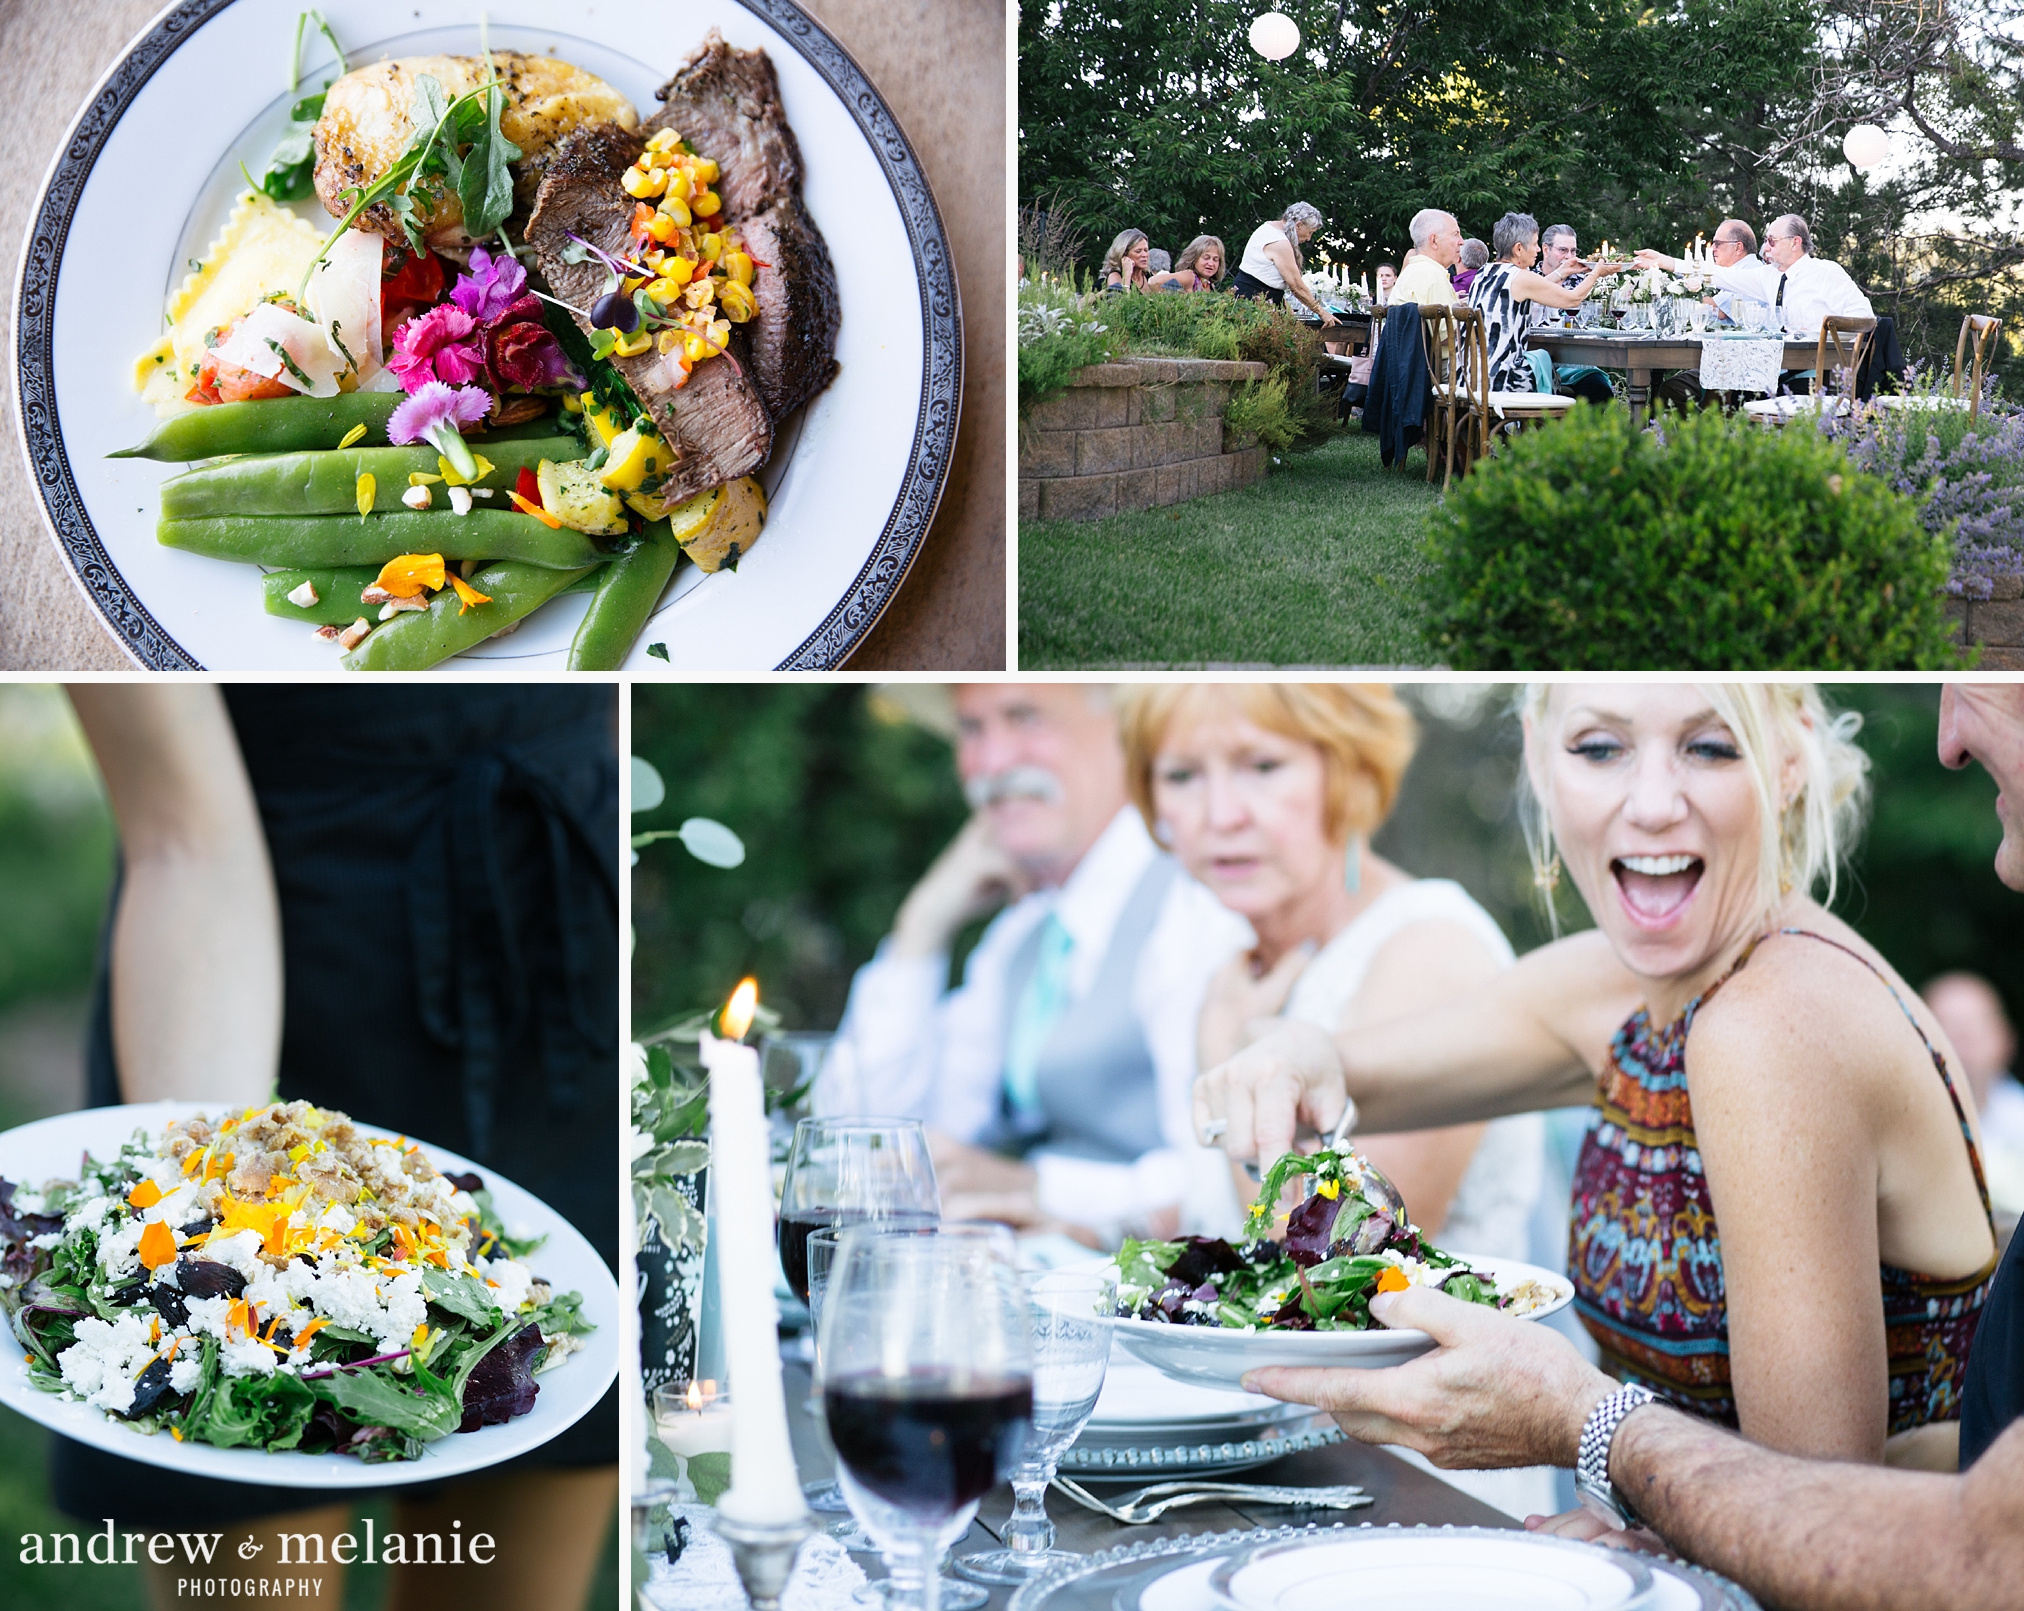 Farm to Table catering, family style wedding dining